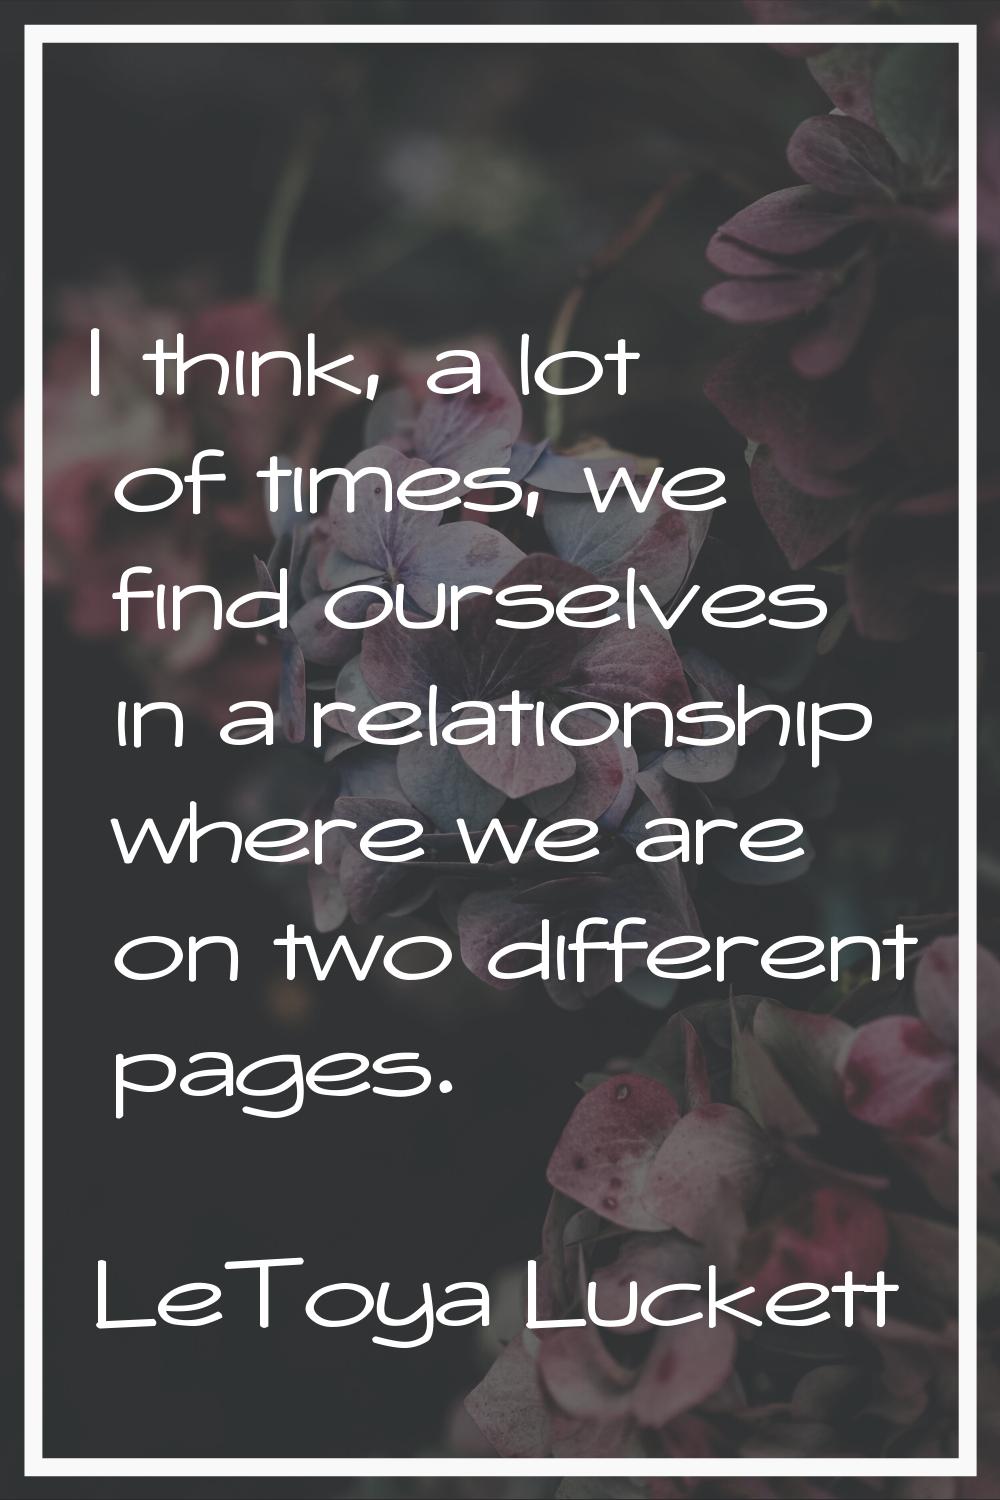 I think, a lot of times, we find ourselves in a relationship where we are on two different pages.